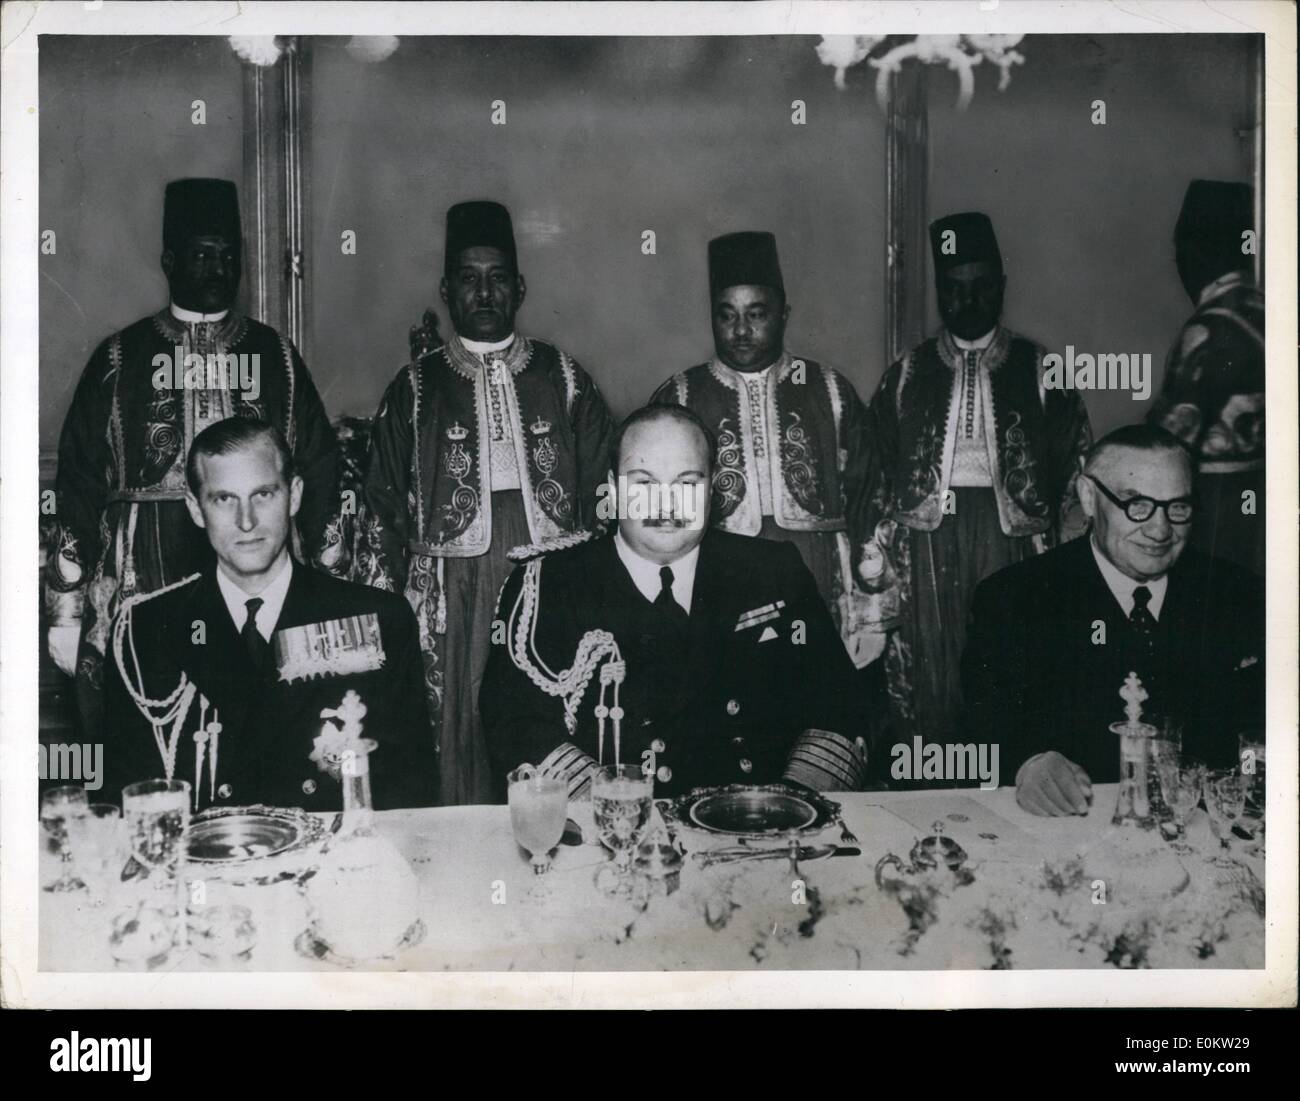 Jan. 31, 1950 - King Farouk with Duke of Edinburgh and Ernest Bevin.: In front of vie servants in Arabian Night's costume sat the Duke of Edinburgh, king Farouk (Center) and Mr, Bevin( right) the British Foreign Minister. The luncheon, given by King Farouk,was held in Koubba Palace. Before the luncheon, Mr. Bevin, homeward bound form the  Conference of Foreign Ministers, discussed the International situation with Egypt. Stock Photo